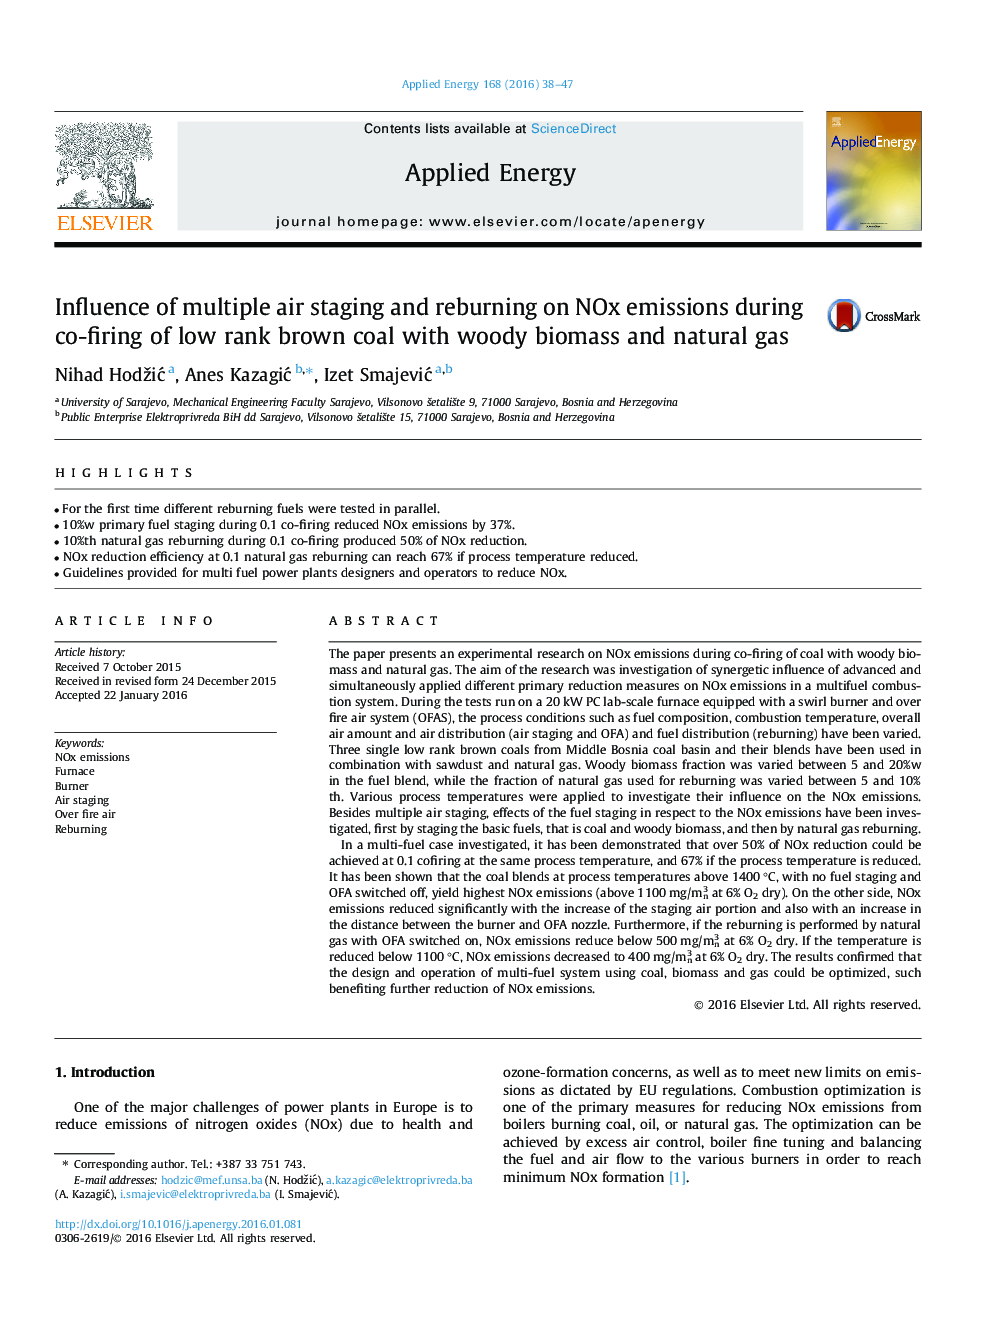 Influence of multiple air staging and reburning on NOx emissions during co-firing of low rank brown coal with woody biomass and natural gas